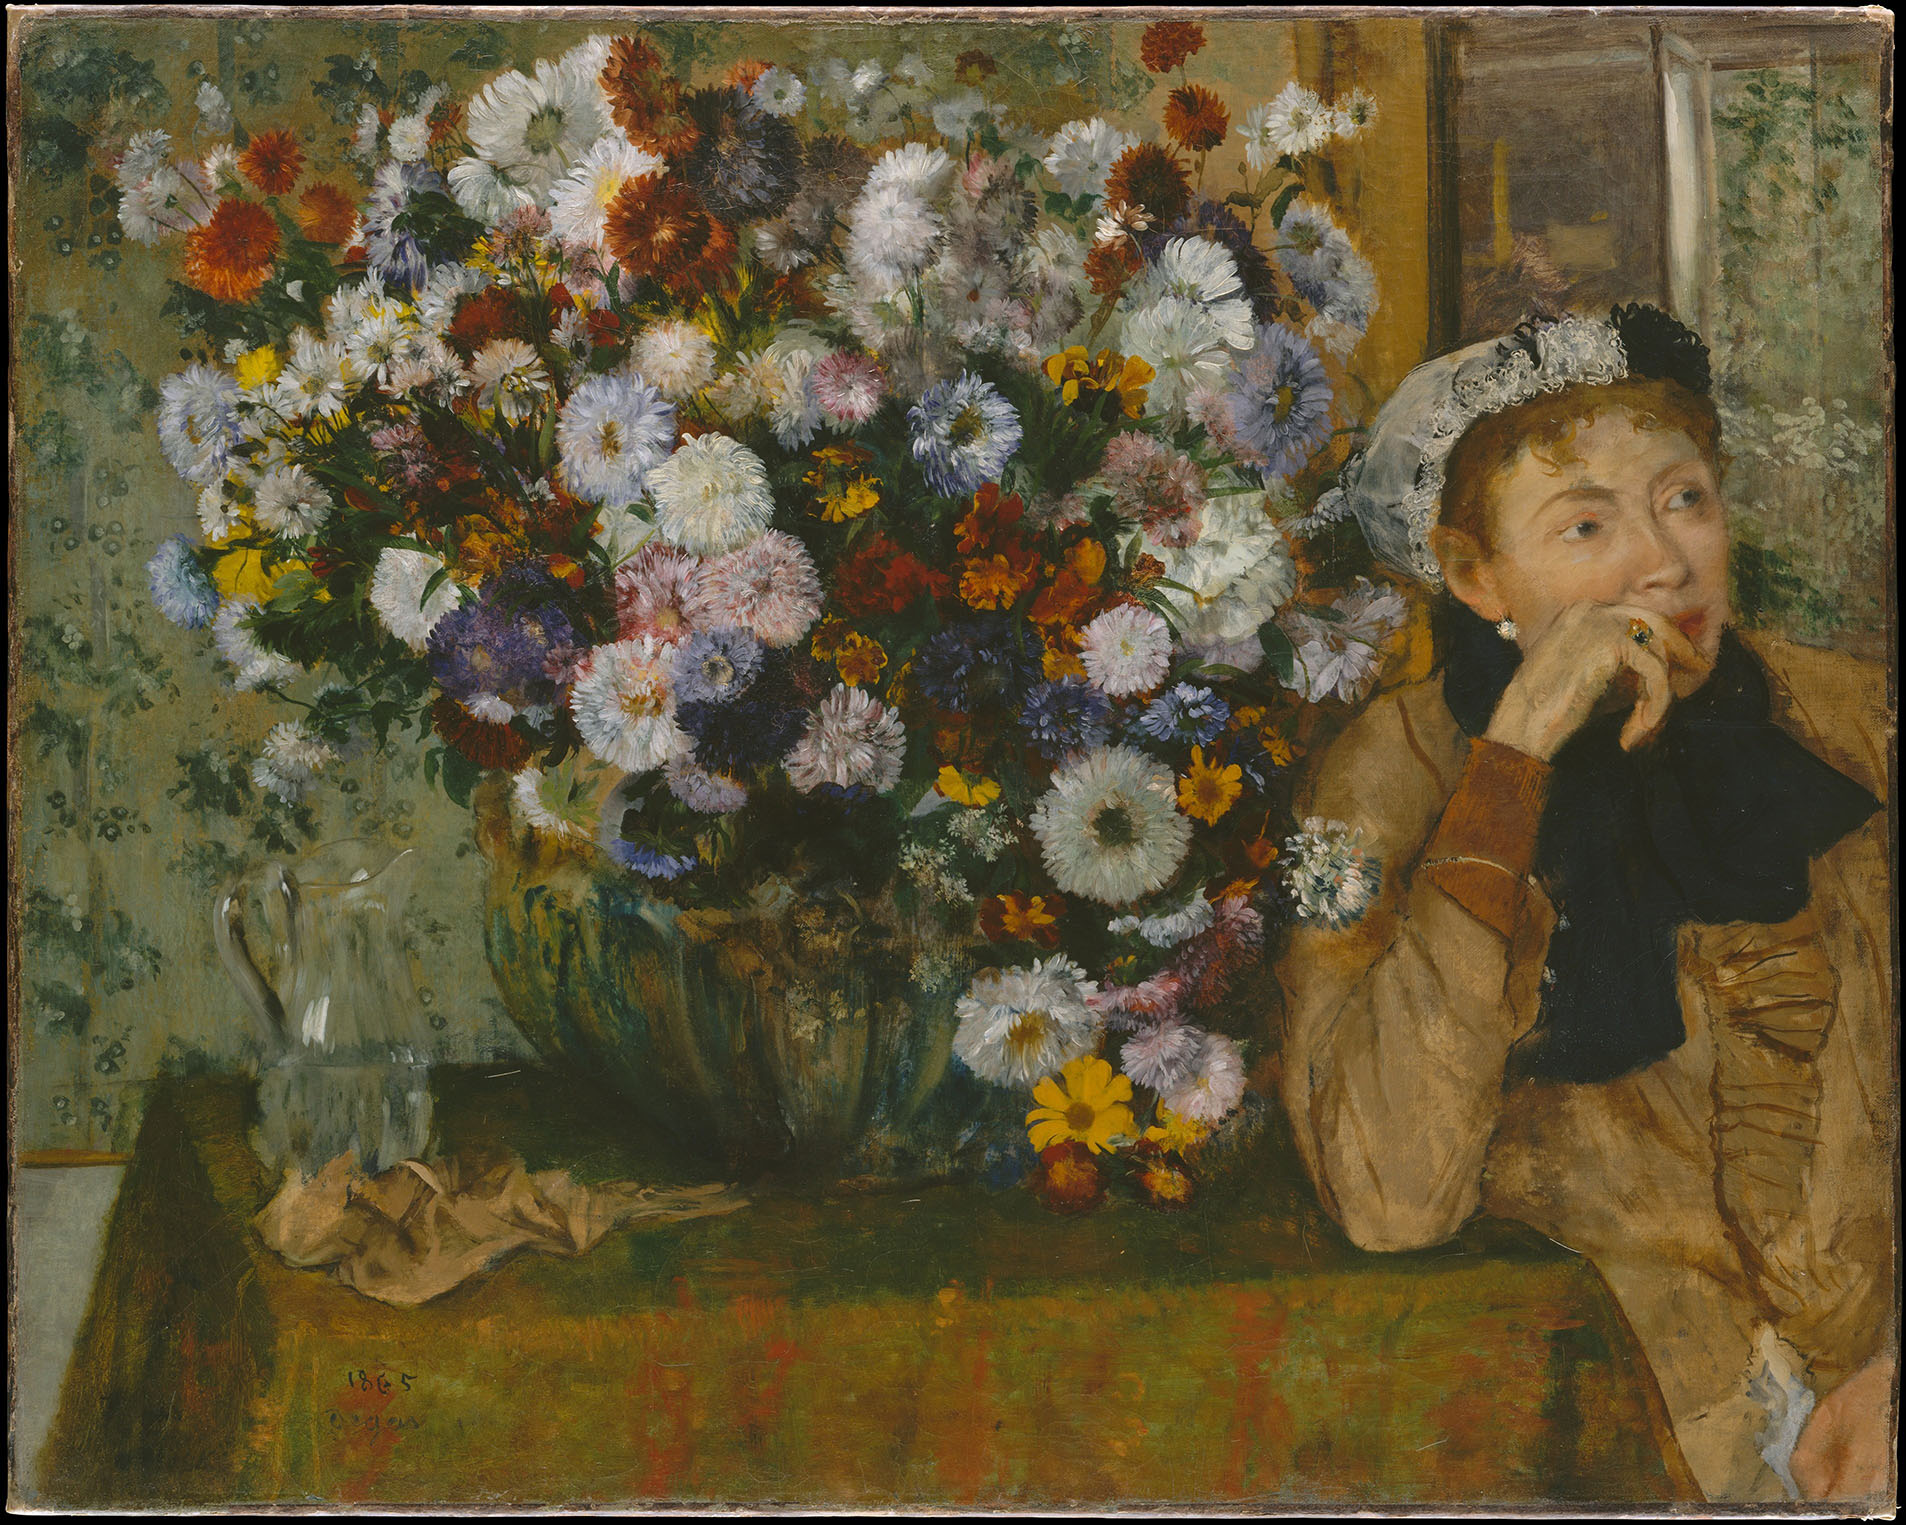 The original A Woman Seated beside a Vase of Flowers by Edgar Degas